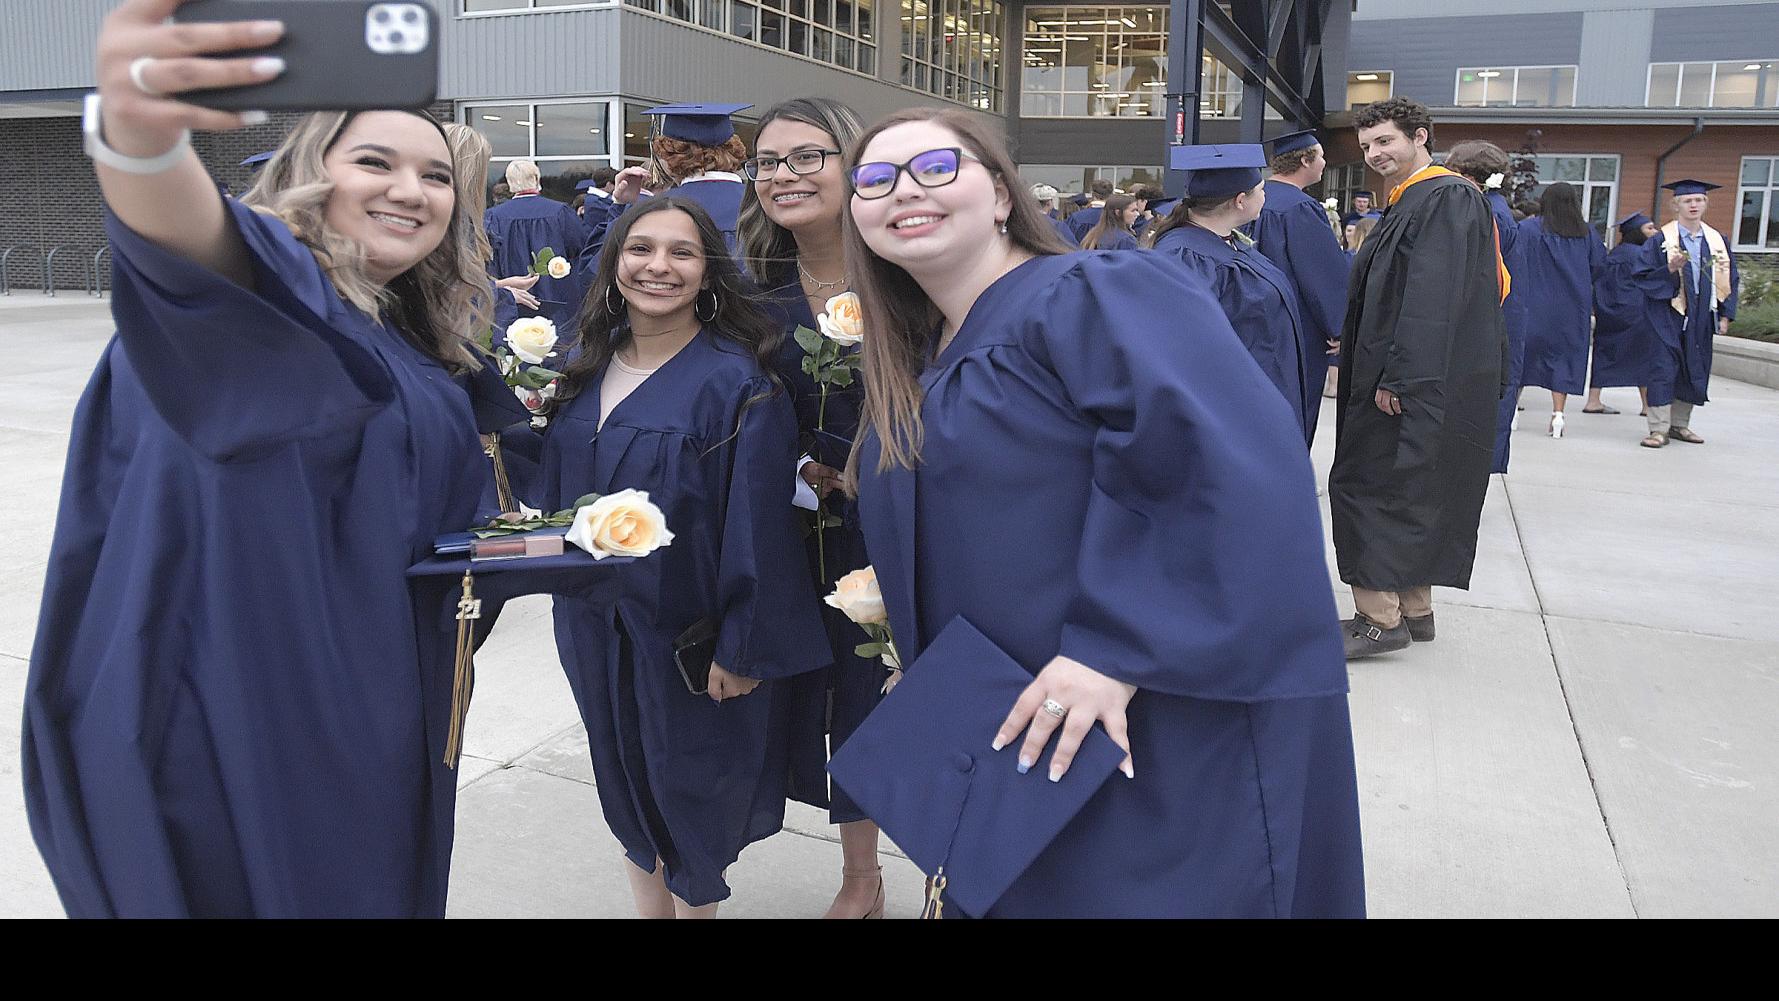 Albany students celebrate graduations in style